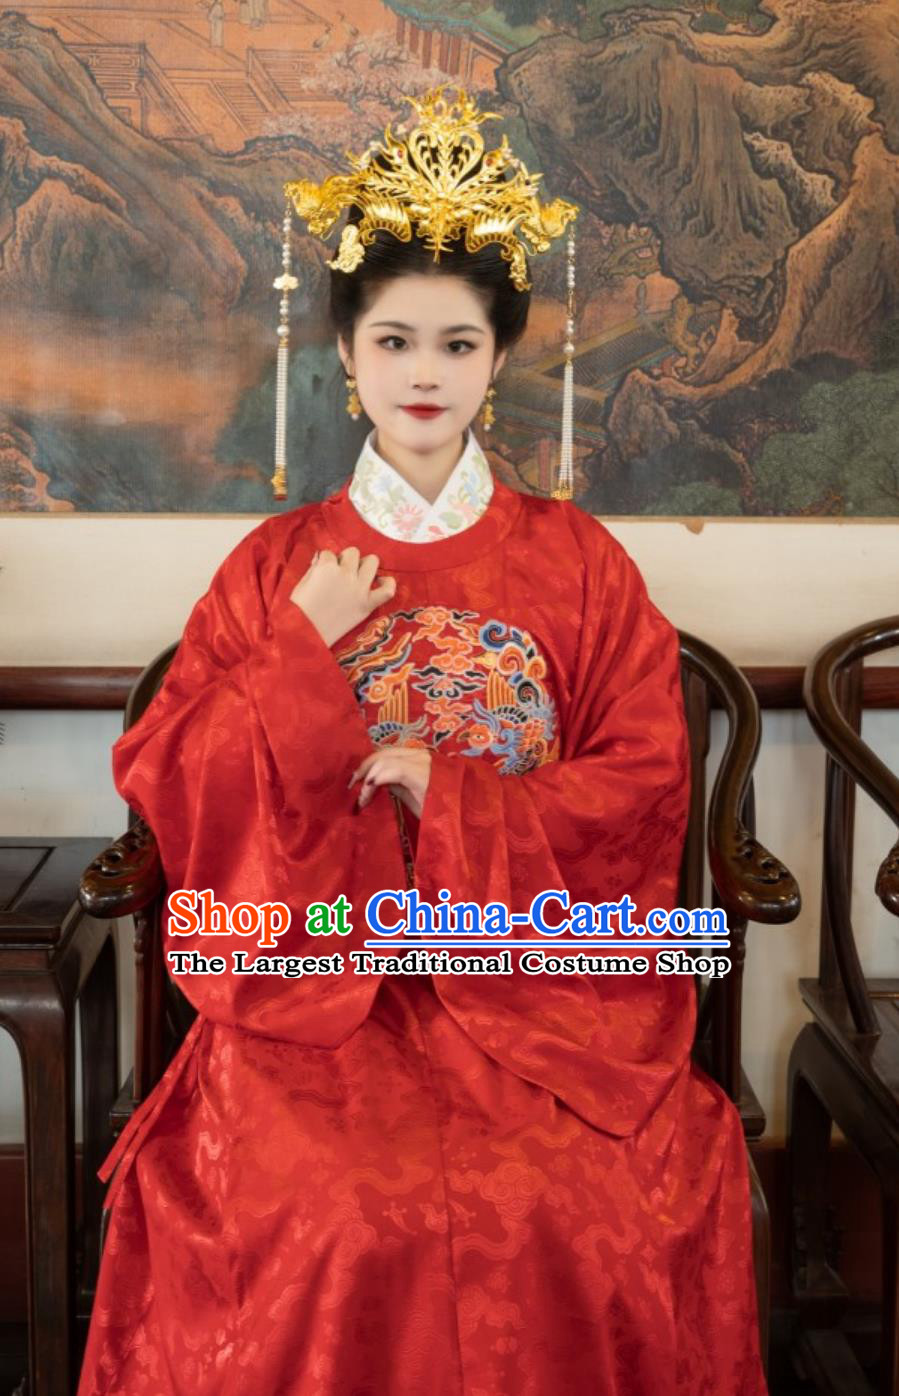 Ancient Chinese Bride Costume Hanfu Online Shop Traditional Ming Dynasty Empress Dress China Wedding Clothing